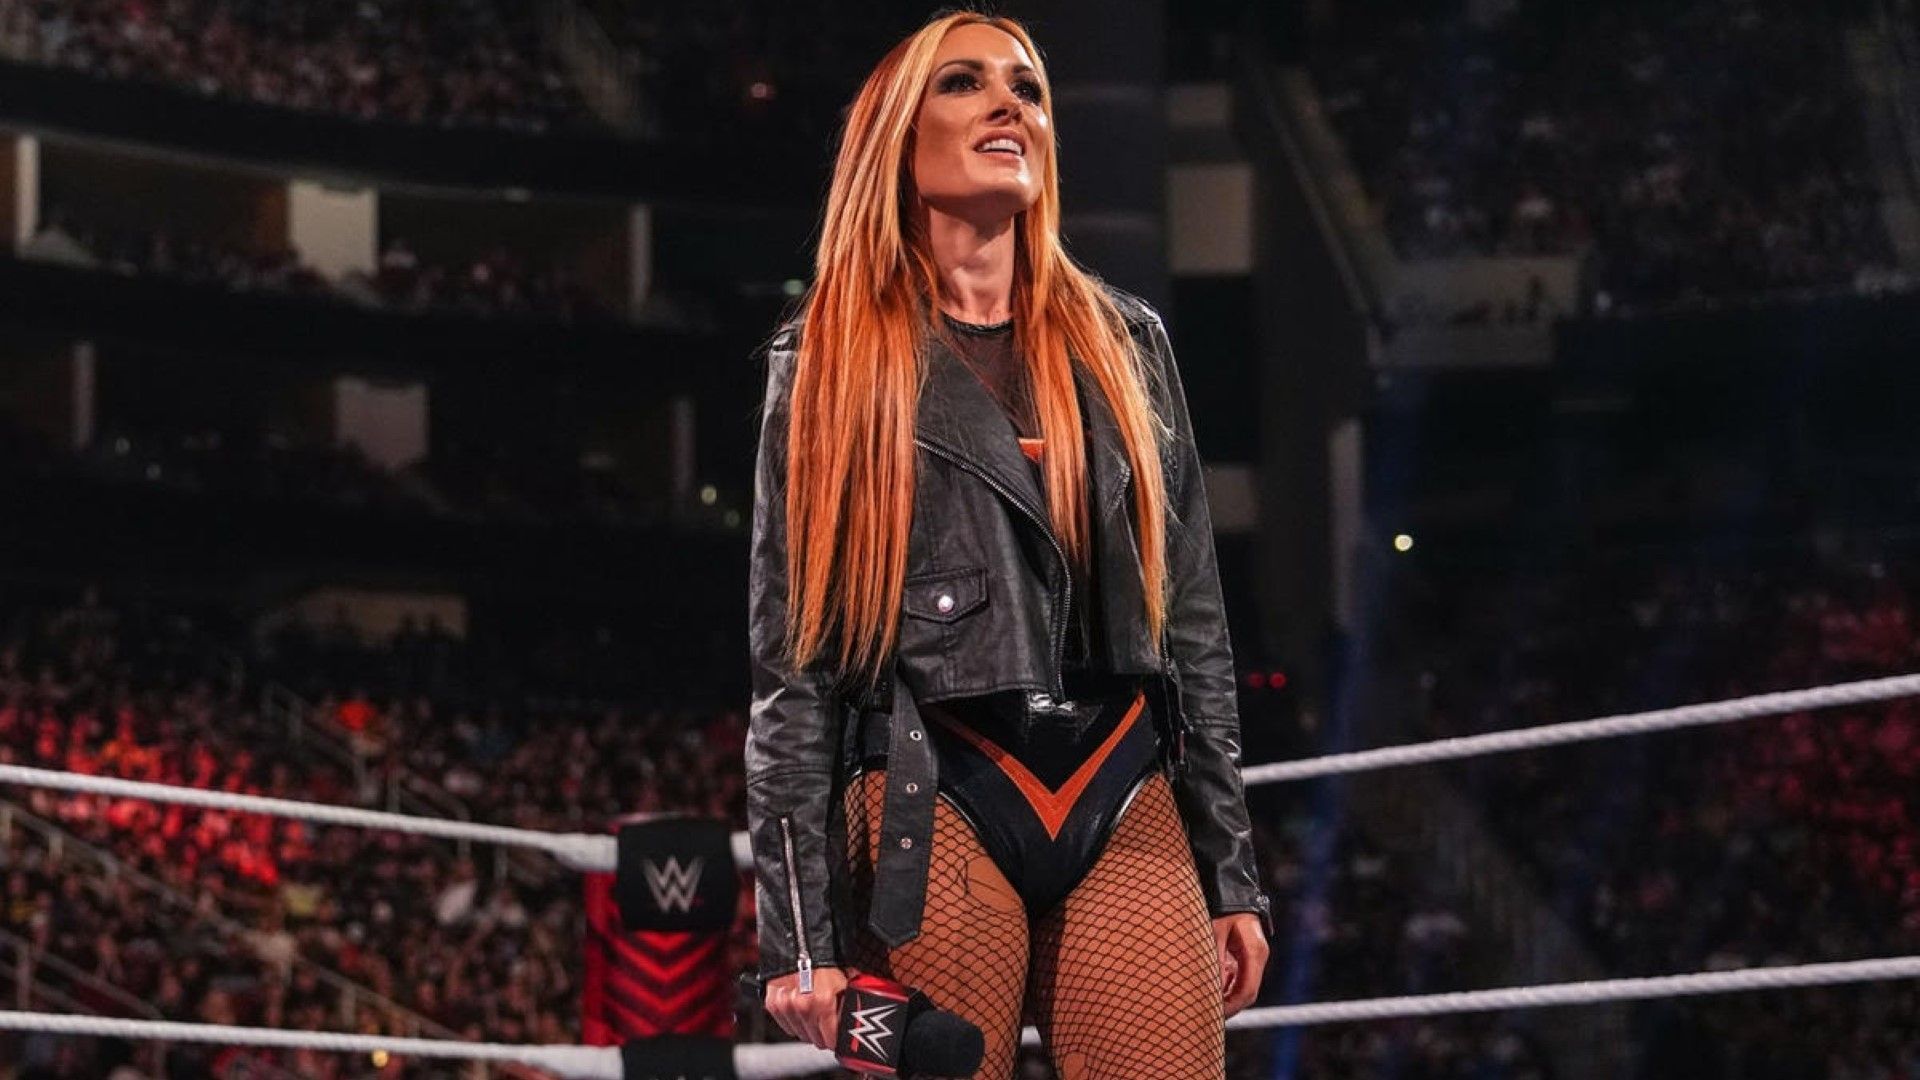 Becky Lynch stands tall in the ring on WWE RAW